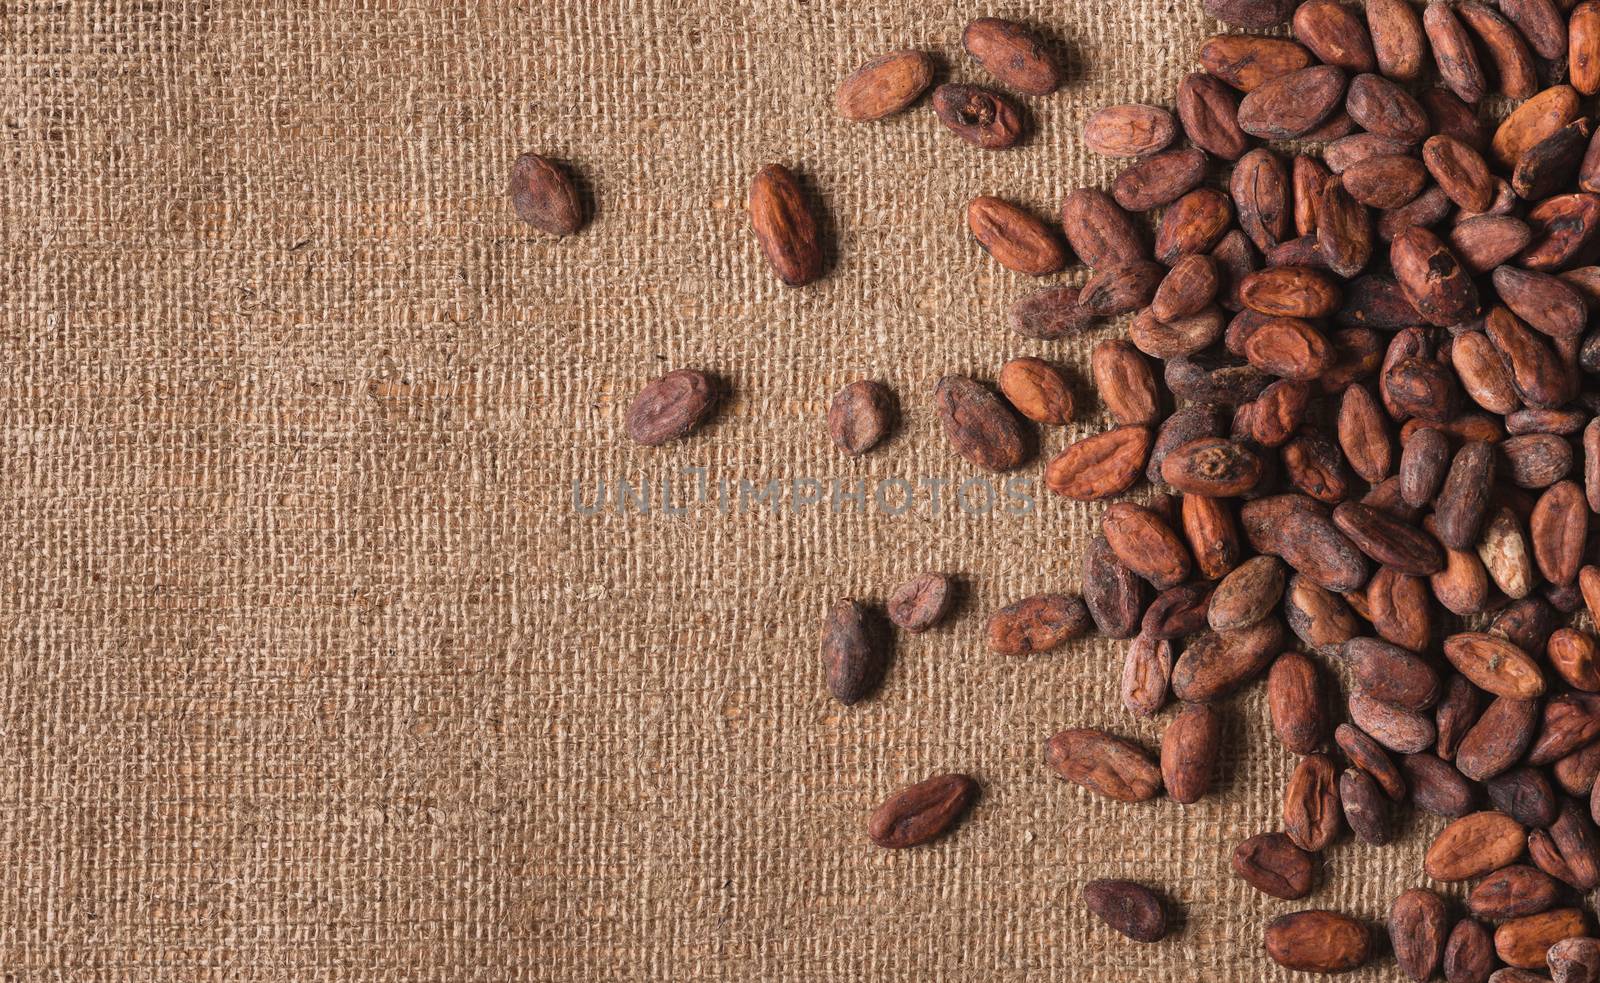  Raw cocoa beans on  sacking top view, close-up by iprachenko